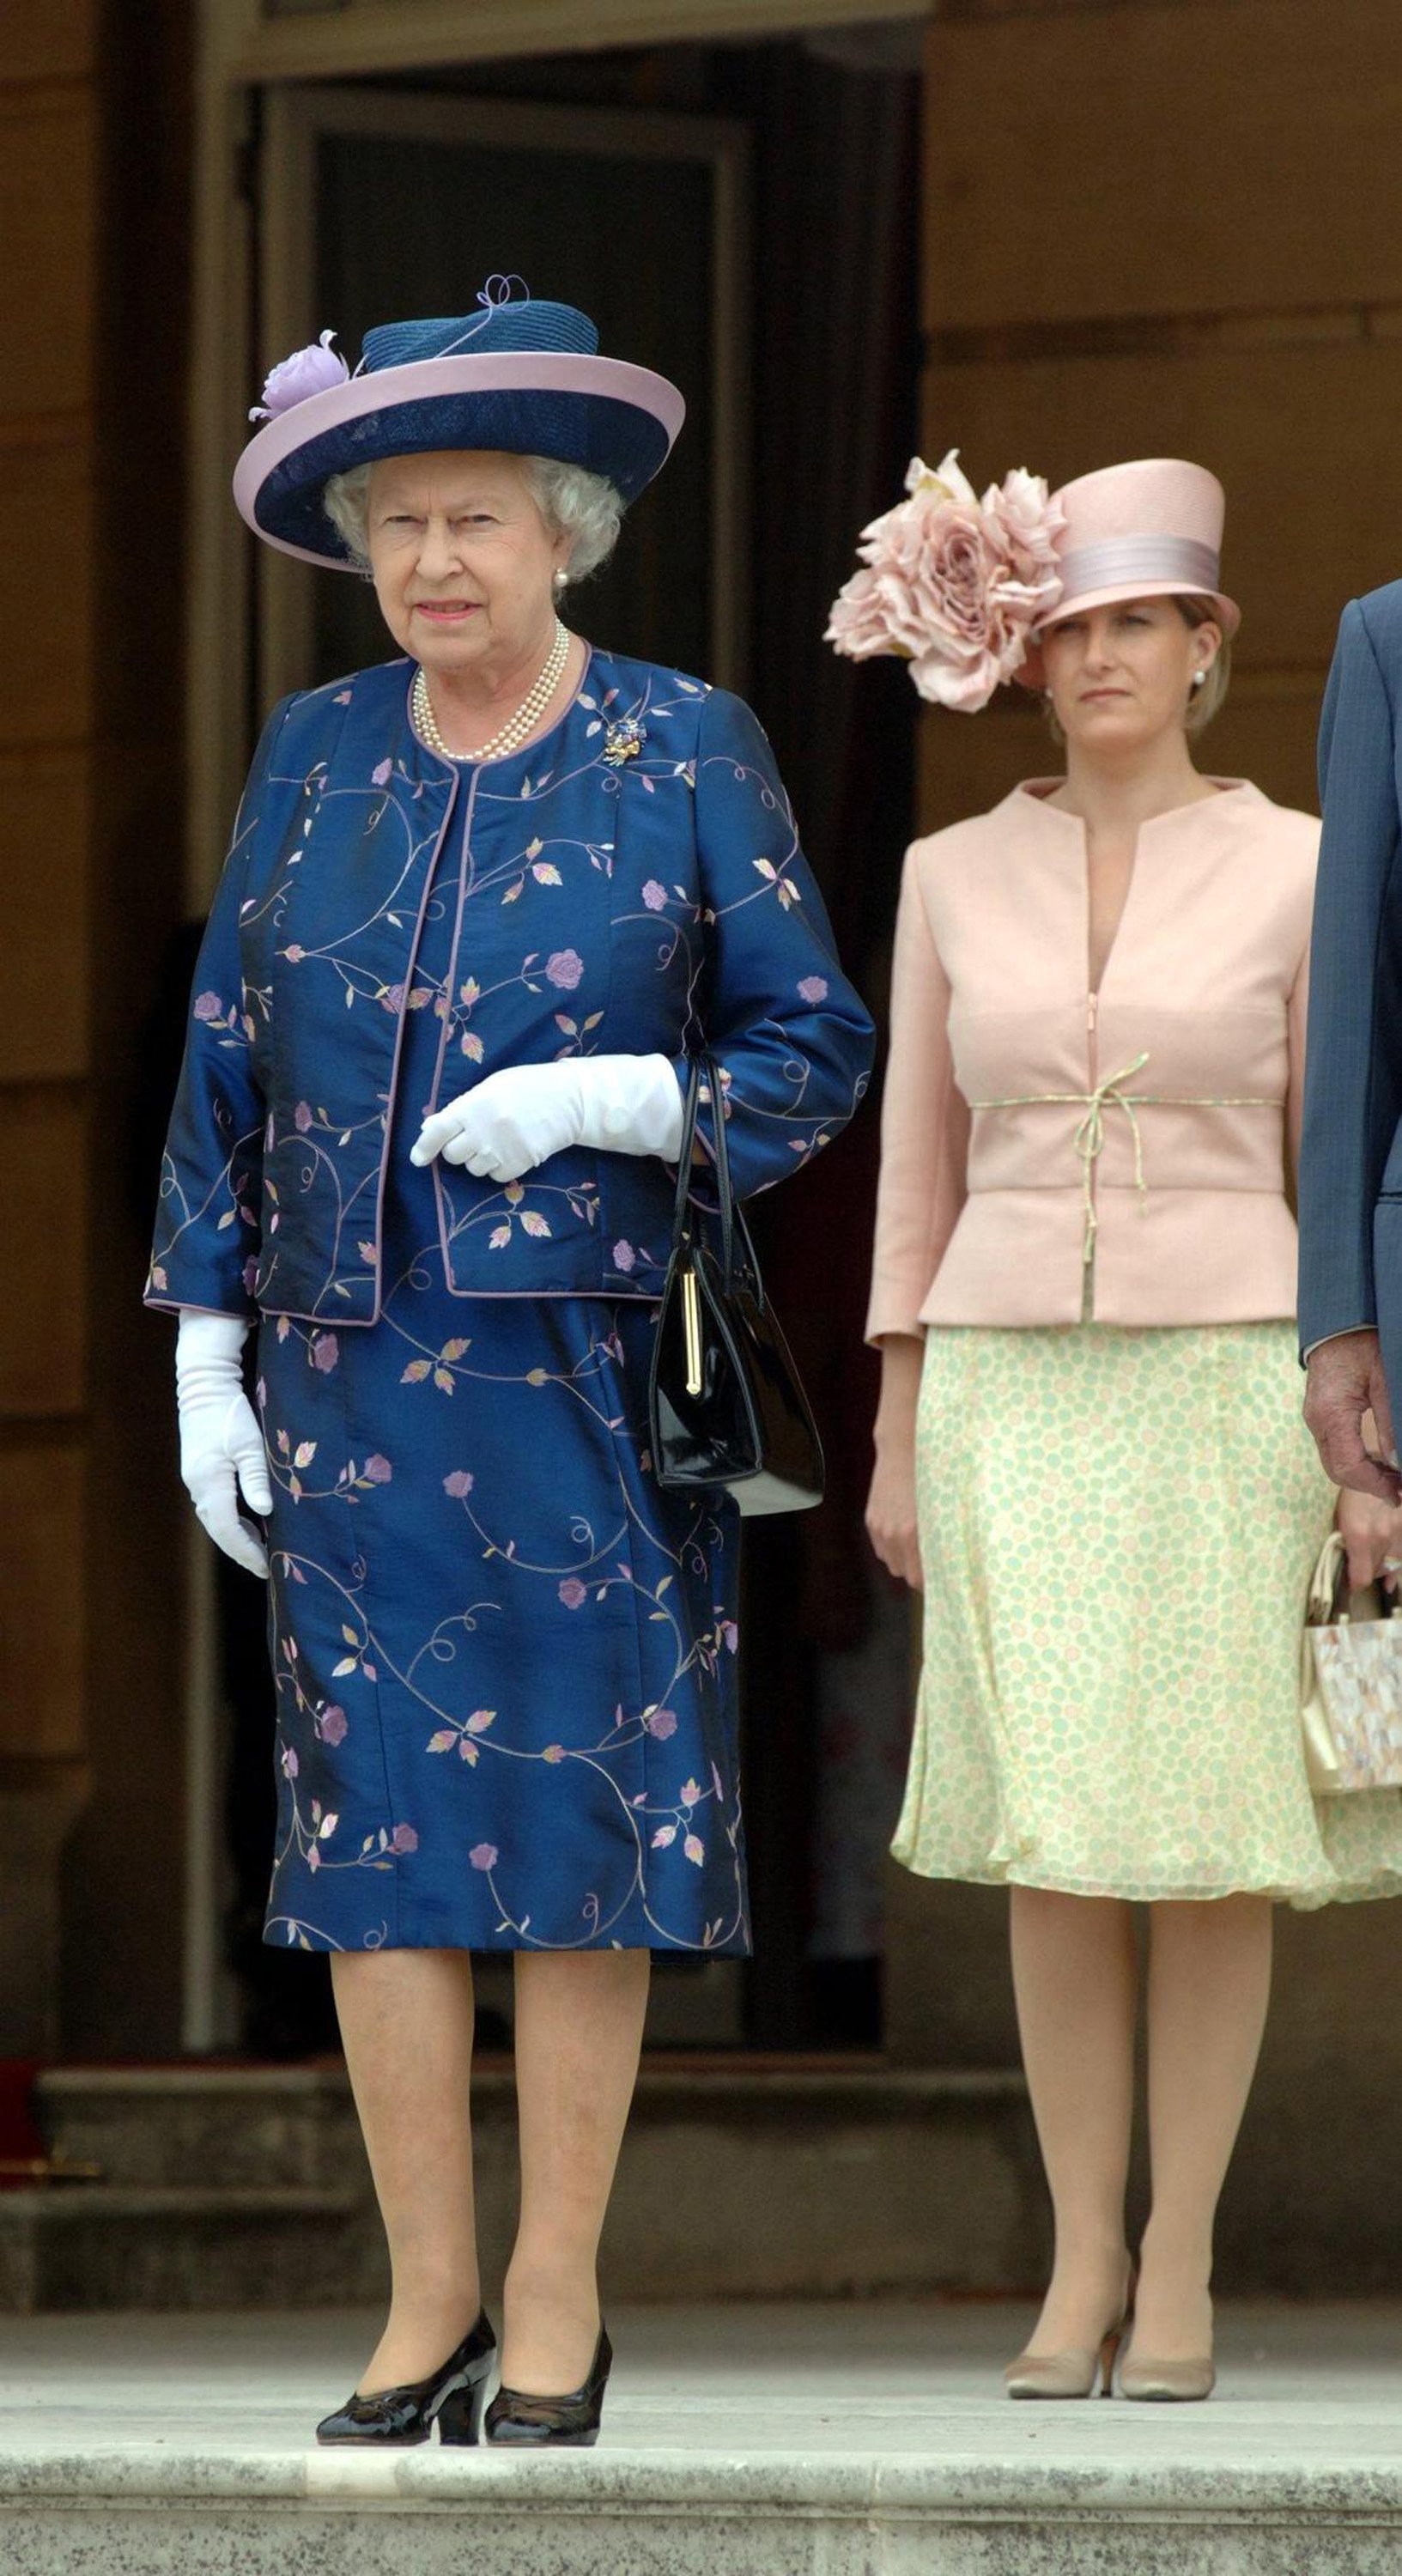 Queen Elizabeth ll and Sophie, Countess of Wessex attend a Royal garden party to celebrate the 50th anniversary of the Duke of Edinburgh's Award scheme on July 13, 2006 | Source: Getty Images 